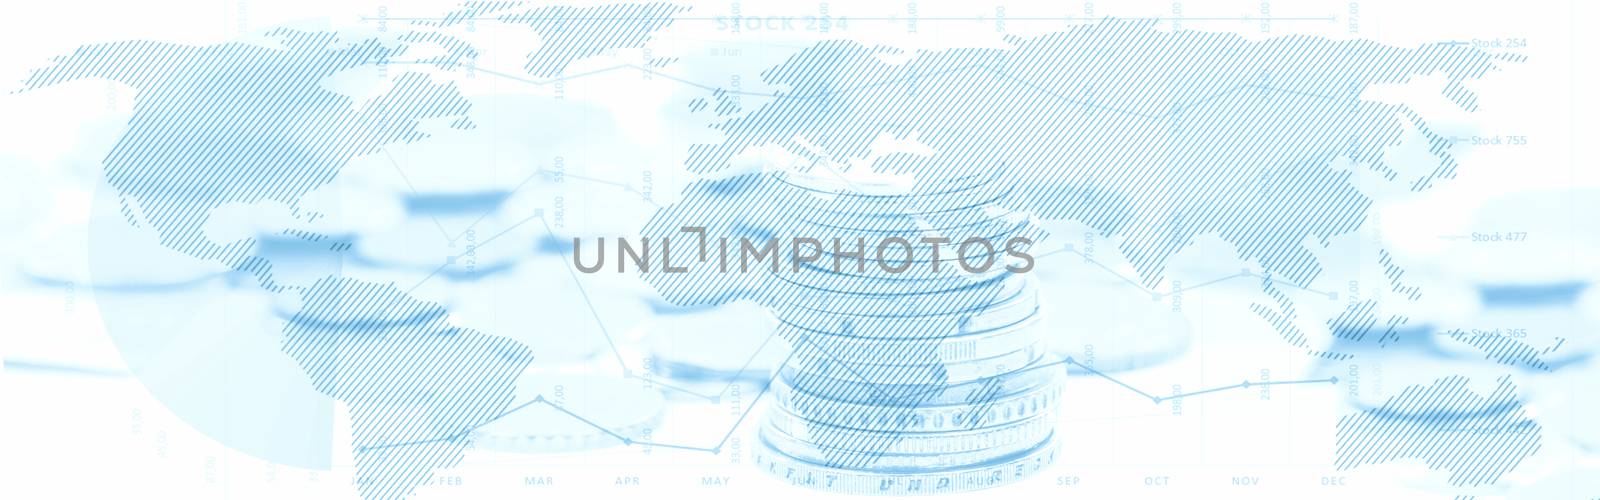 Stock market abstract background by wdnet_studio